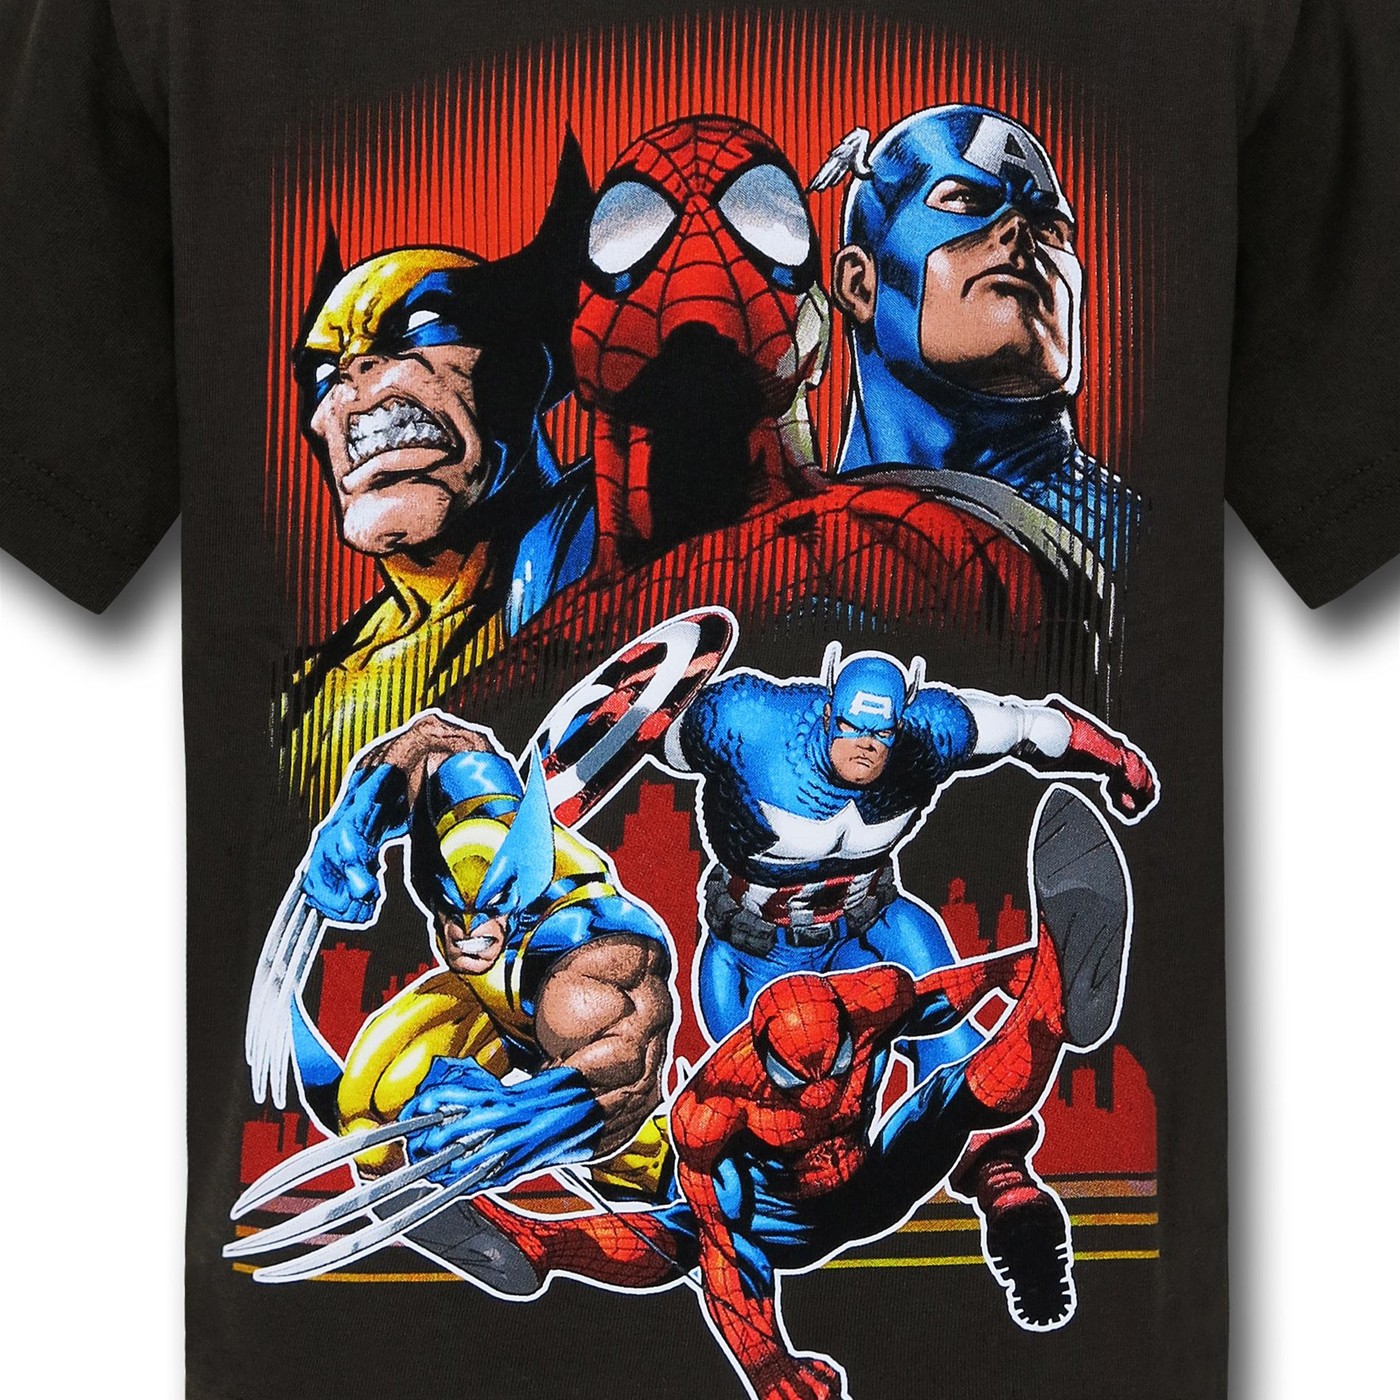 Marvel Heroes Stance and Action Kids T-Shirt